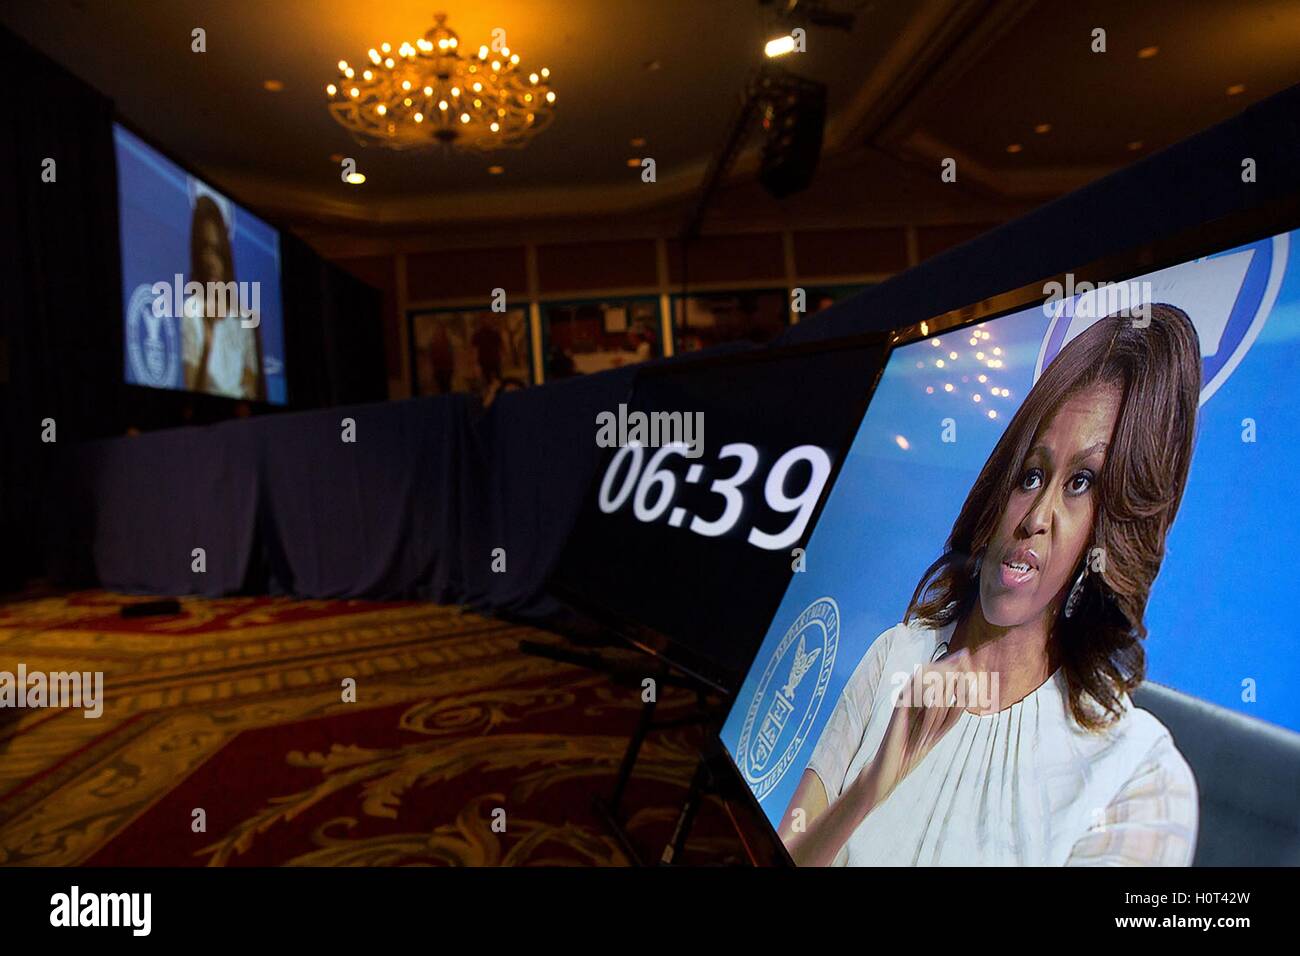 Television monitors show First Lady Michelle Obama as she participates in a conversation during the White House Summit on Working Families at the Omni Shoreham Hotel June 23, 2014 in Washington, DC. Stock Photo